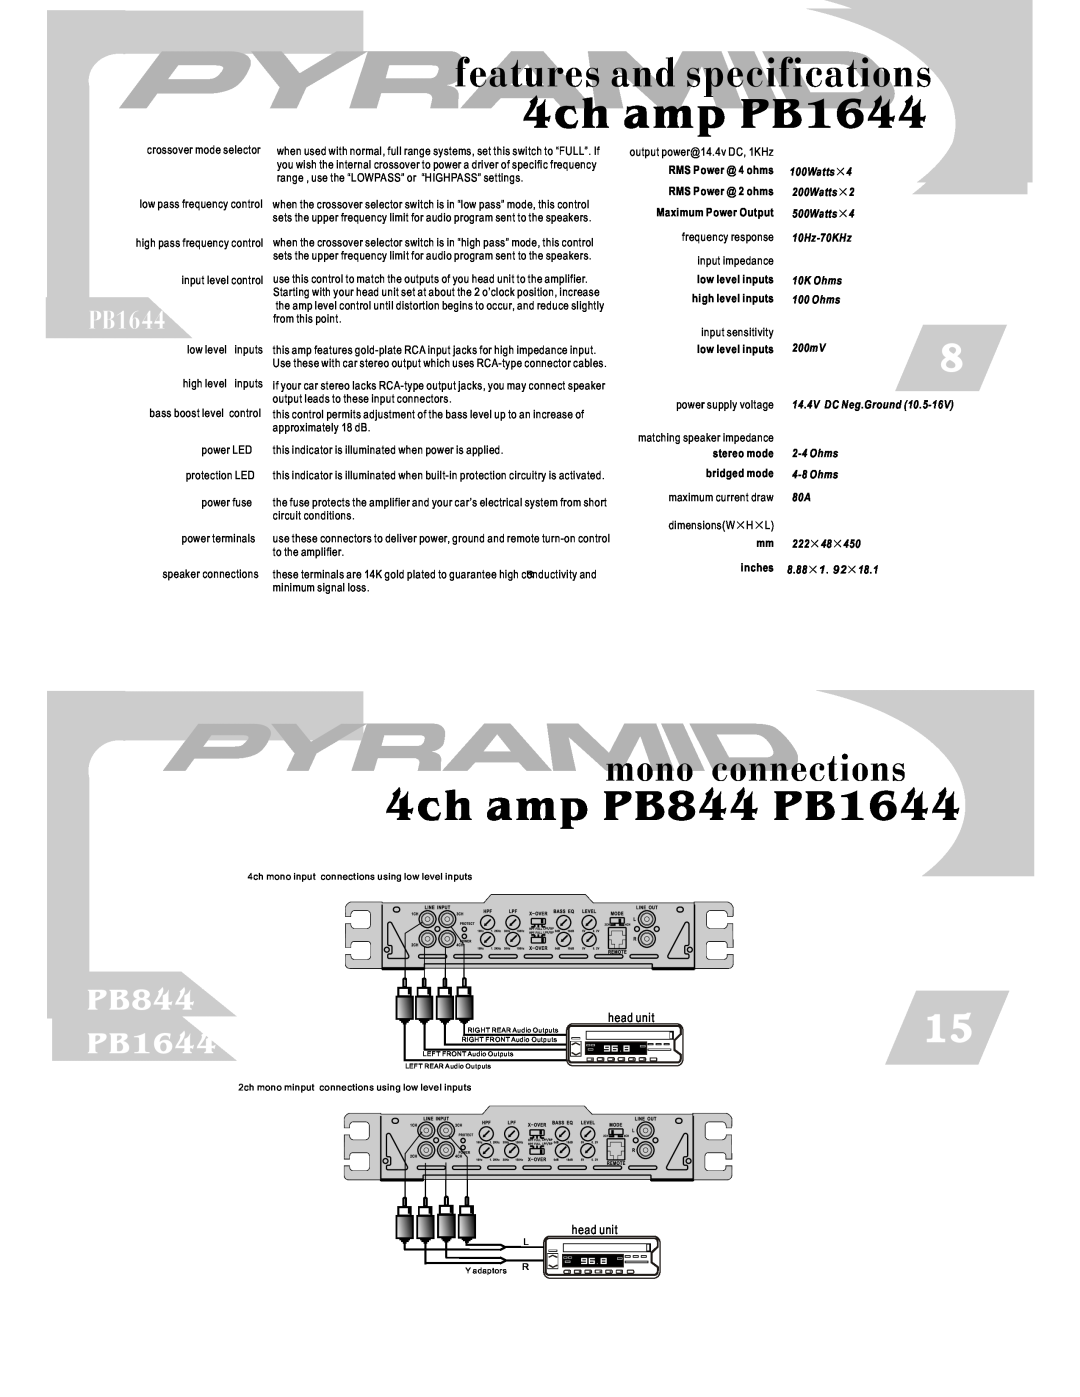 Pyramid Car Audio PB744 4ch amp PB844 PB1644, mono connections, features and specifications 4ch amp PB1644, head unit 